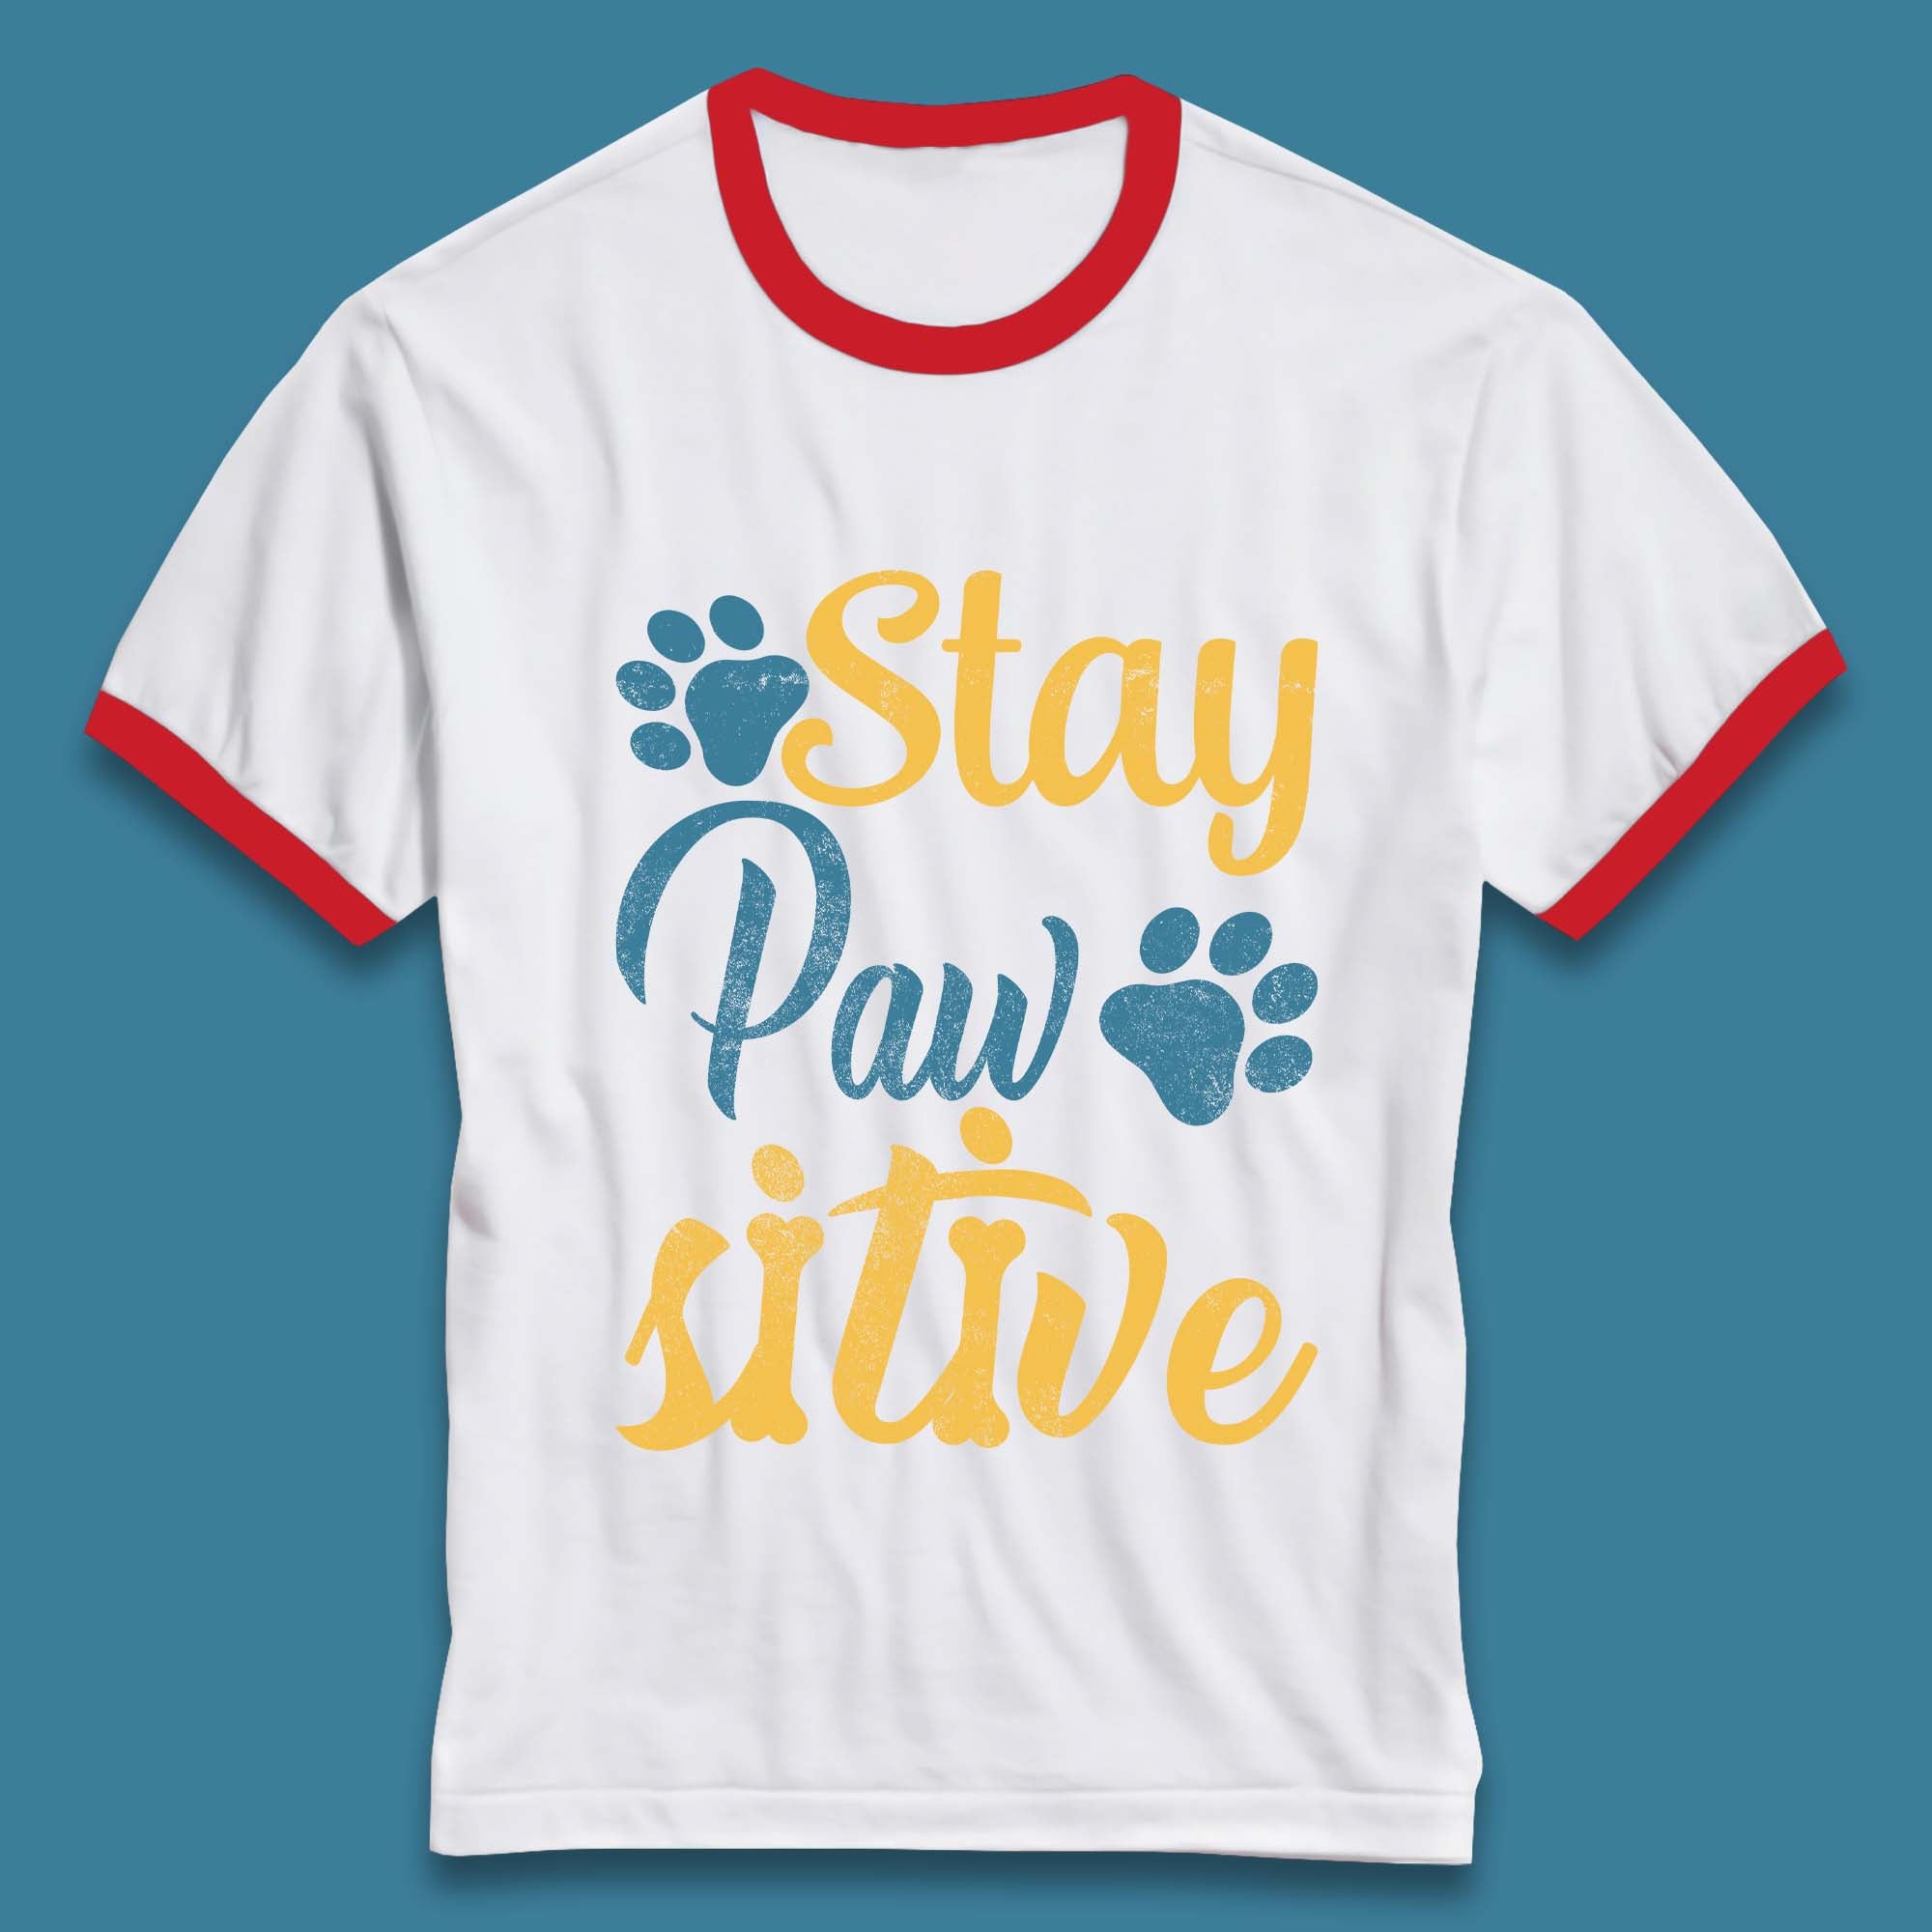 Stay Pawsitive Ringer T-Shirt